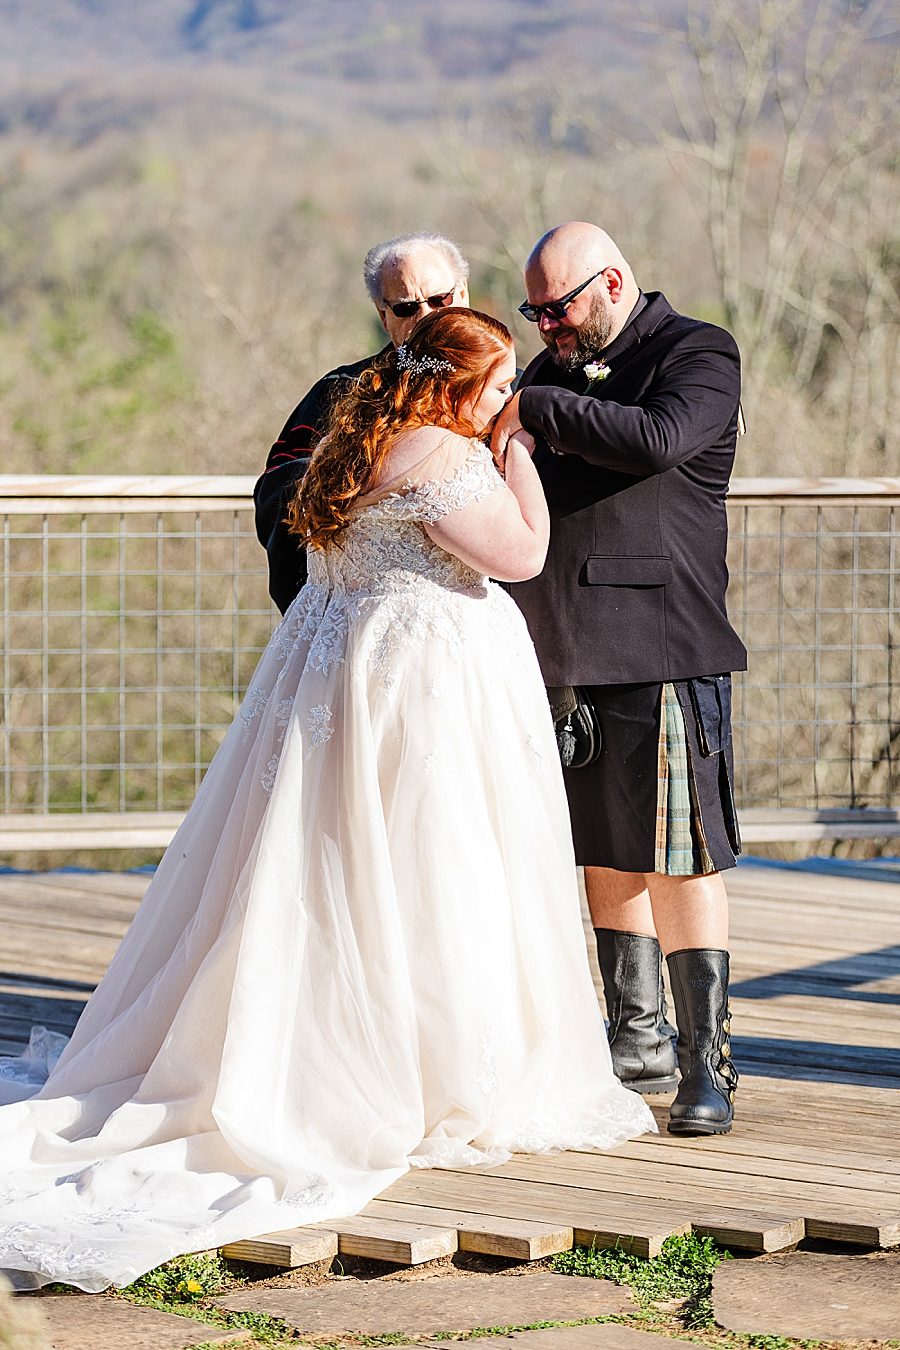 kiss on the hand at dreammore resort wedding